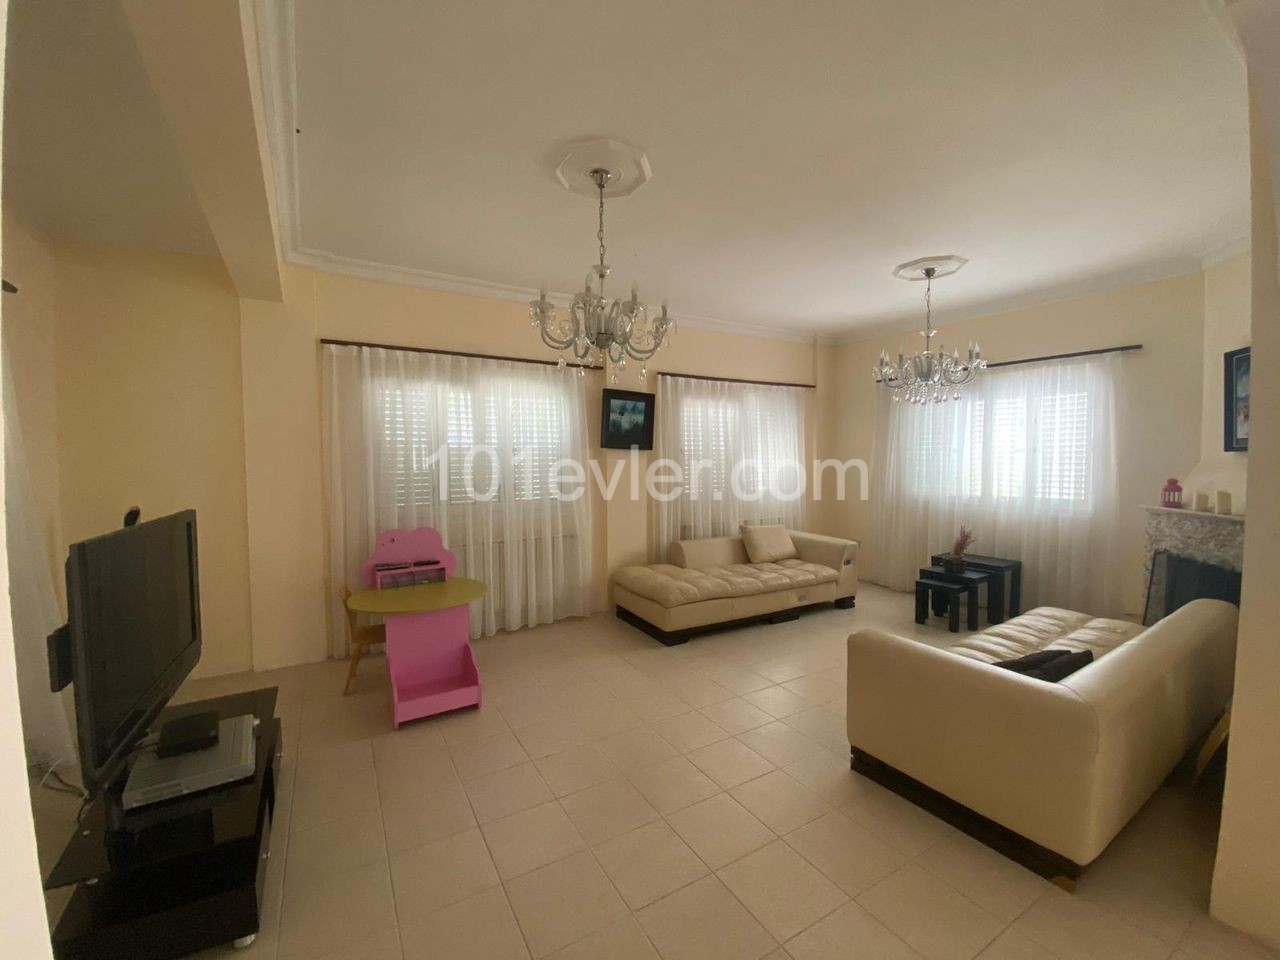 Villa with 3 + 1 furnished pool in the center of Kyrenia 750 STG / 0548 823 96 10 ** 